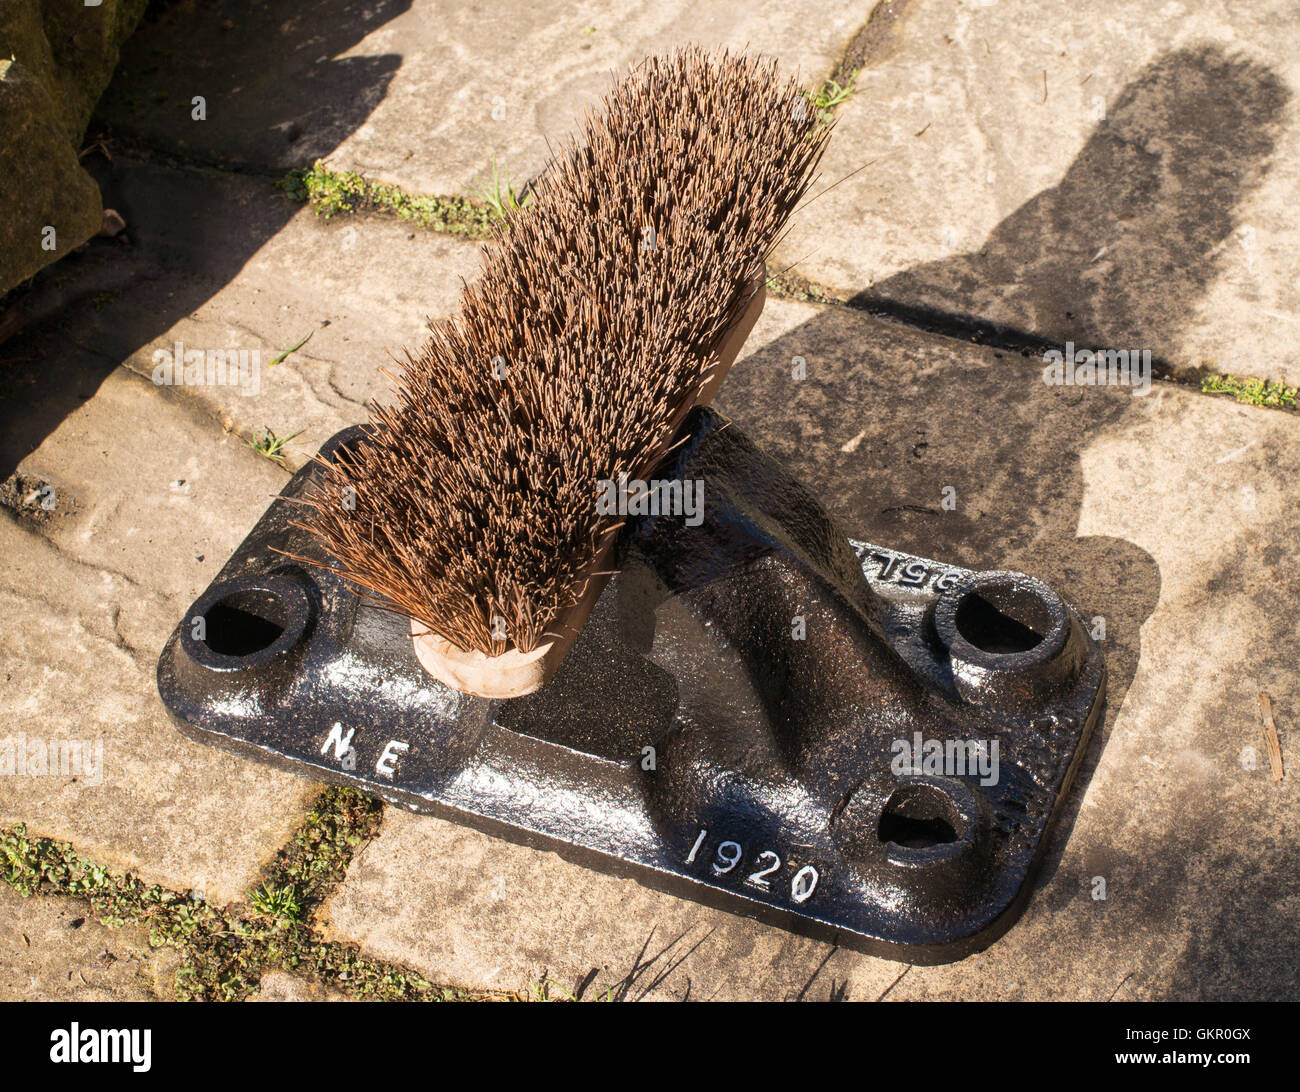 An old railway track chair used to hold a broom head as a boot cleaner, England UK Stock Photo